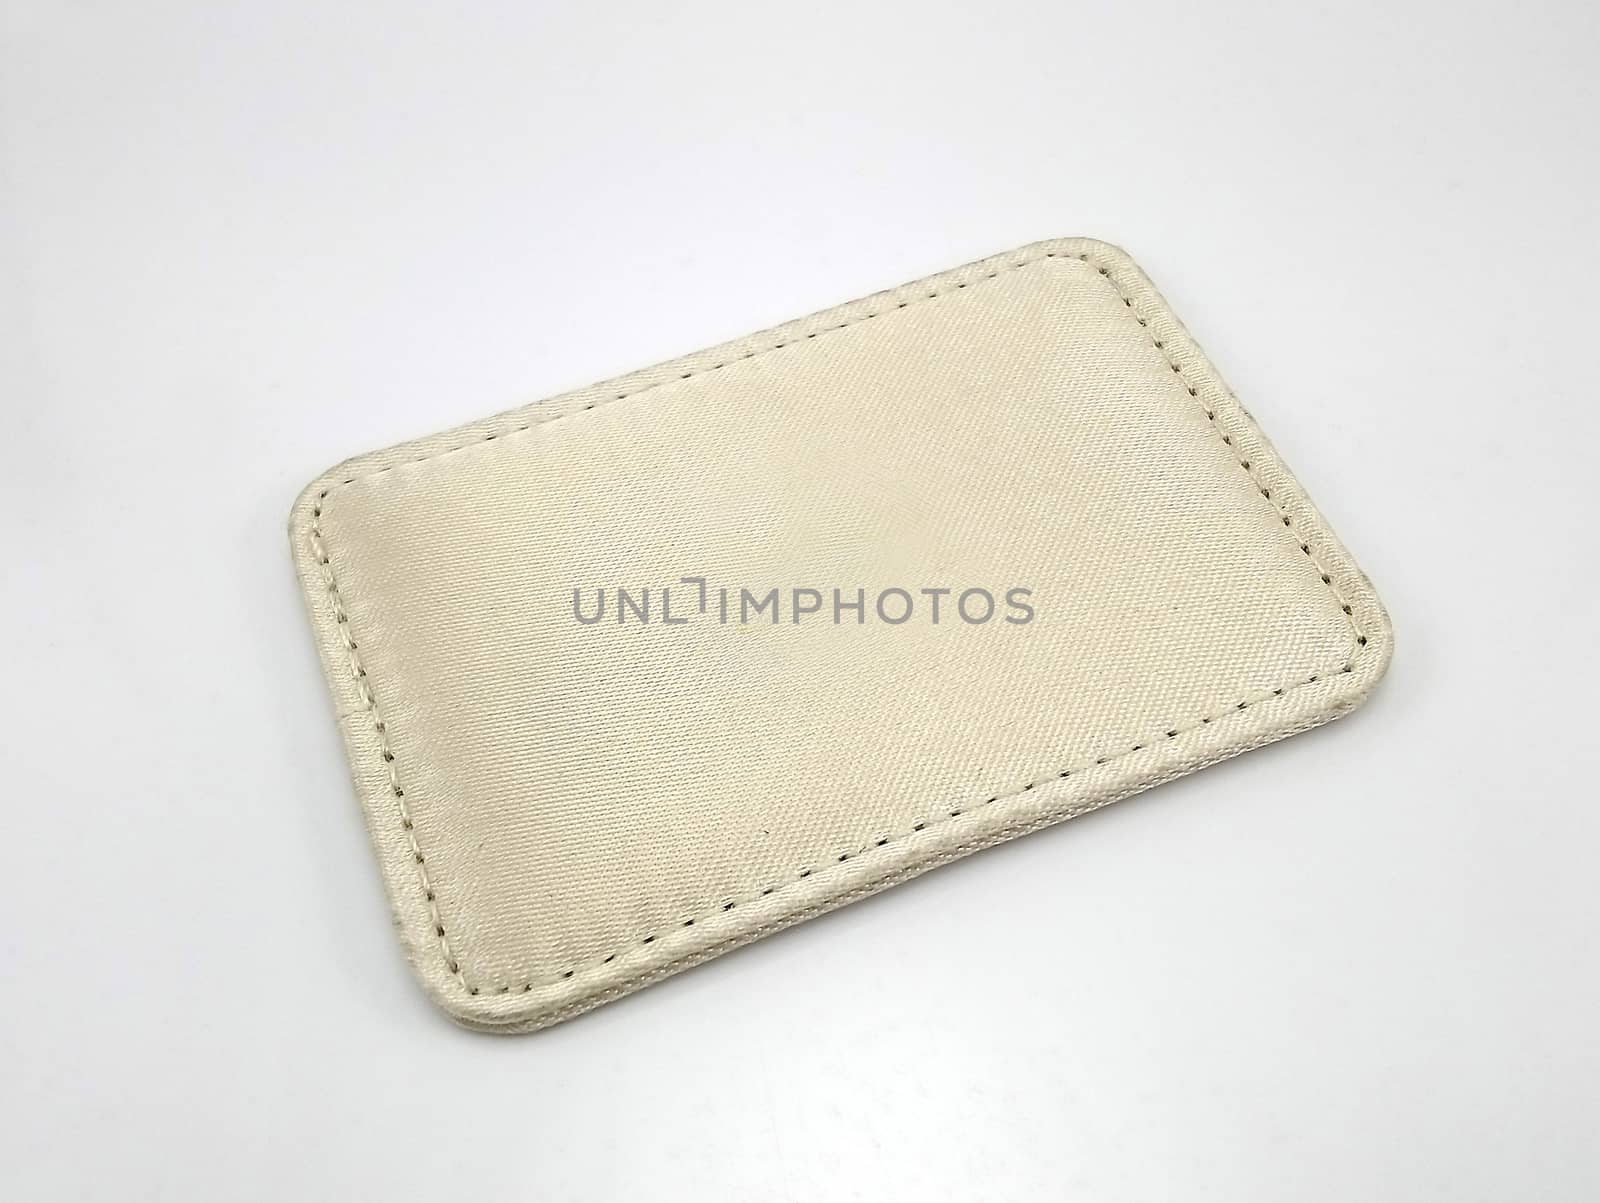 Light brown portable leather mirror case use to see one self reflection for make up